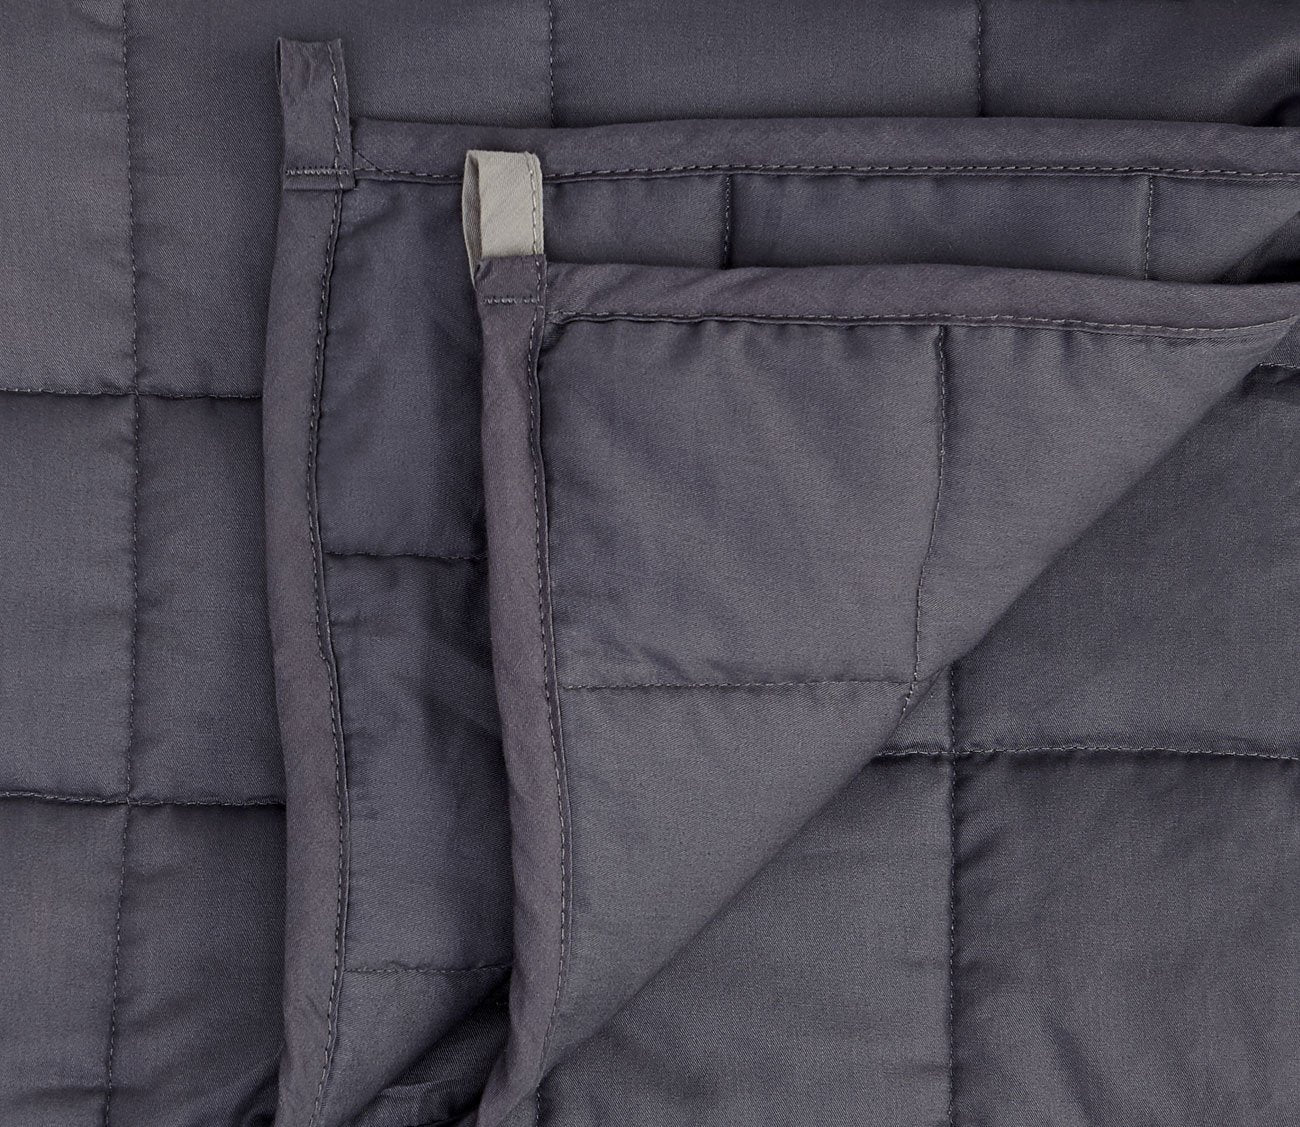 Zensory 20lb Weighted Blanket by City Mattress